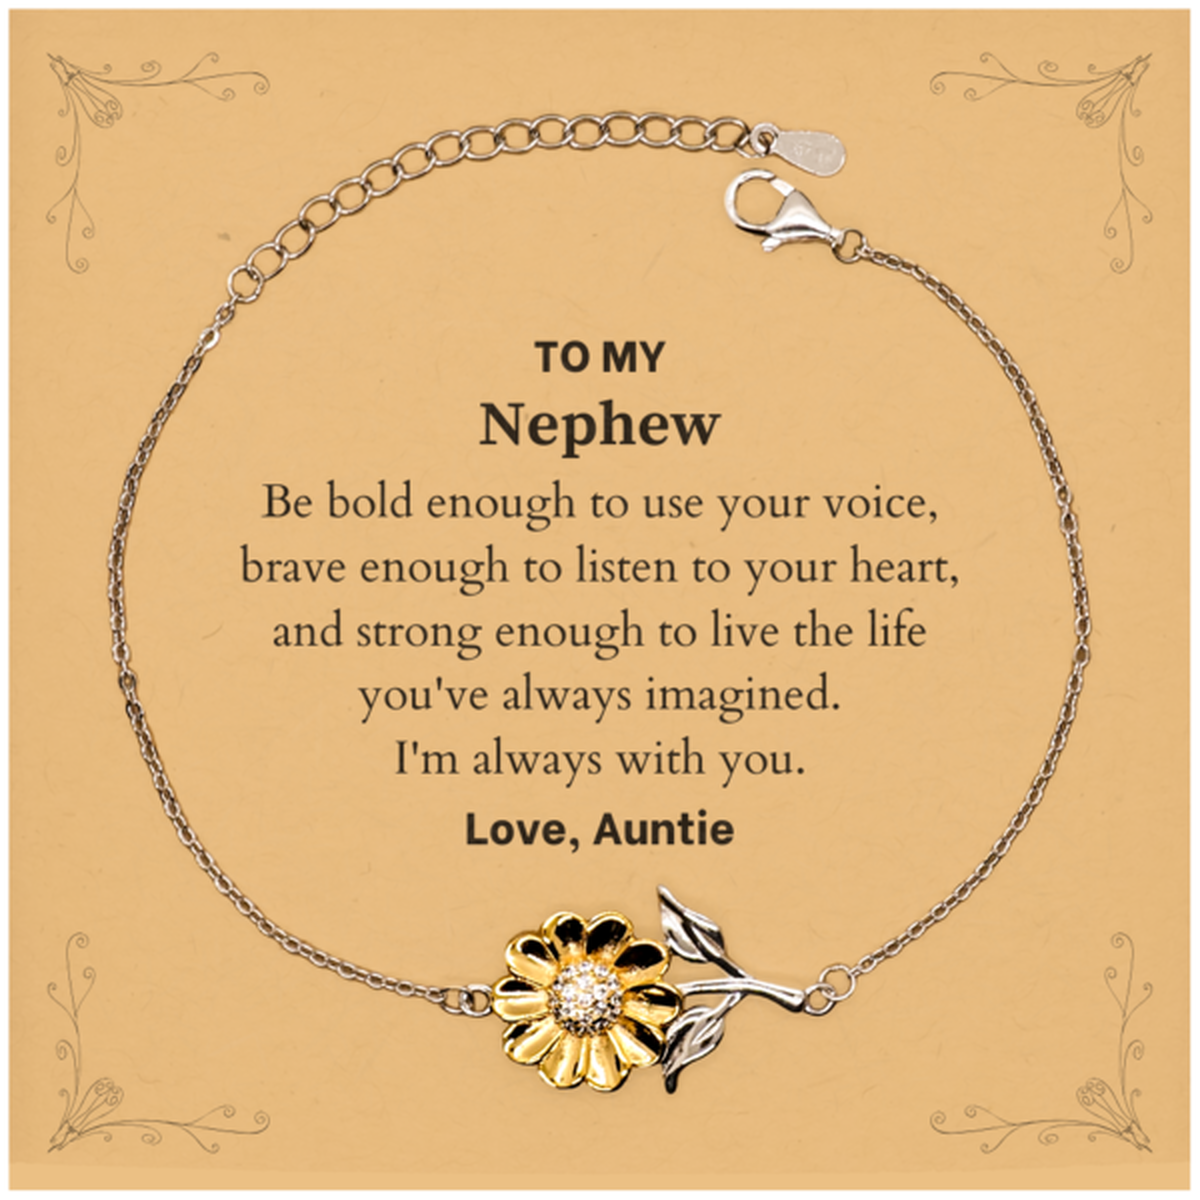 Keepsake Nephew Sunflower Bracelet Gift Idea Graduation Christmas Birthday Nephew from Auntie, Nephew Be bold enough to use your voice, brave enough to listen to your heart. Love, Auntie